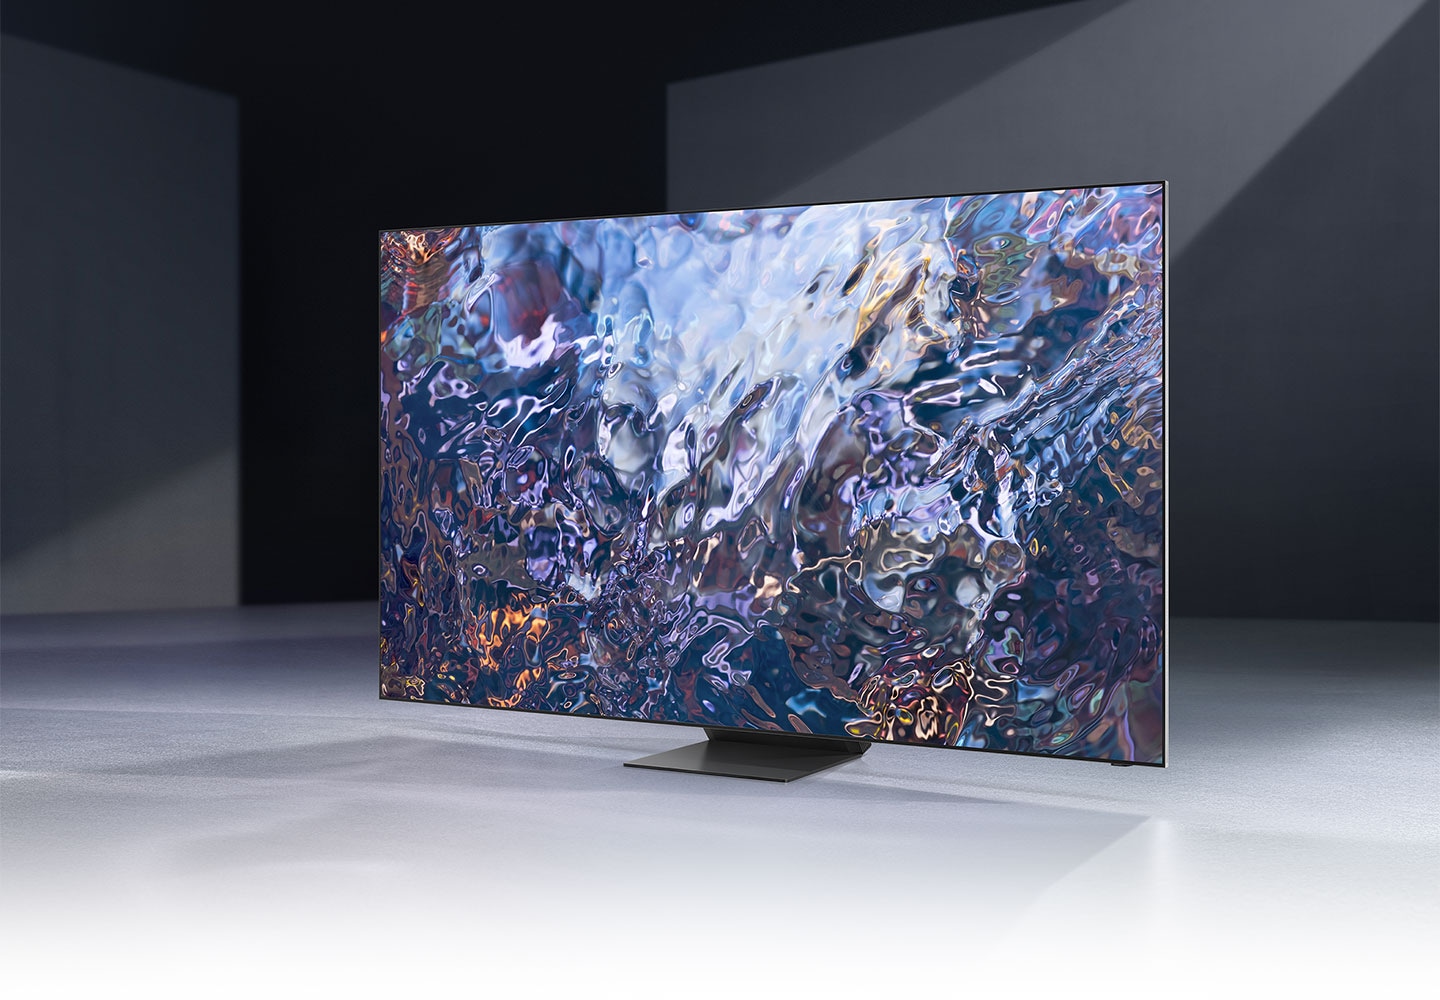 QN700A displays intricately blended color graphics which demonstrate long-lasting colors of Quantum Dot technology.